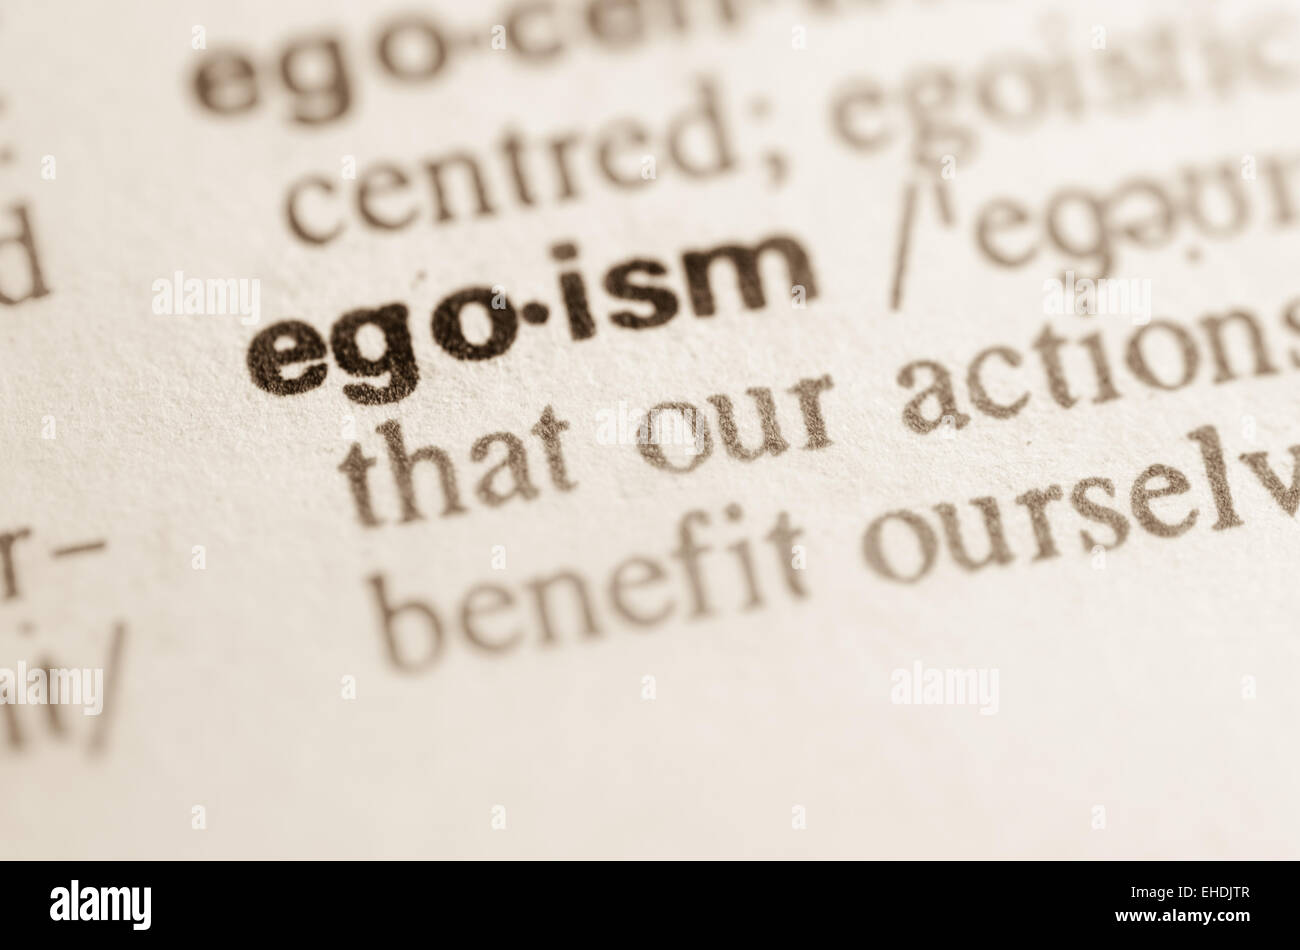 Definition of word egoism in dictionary Stock Photo